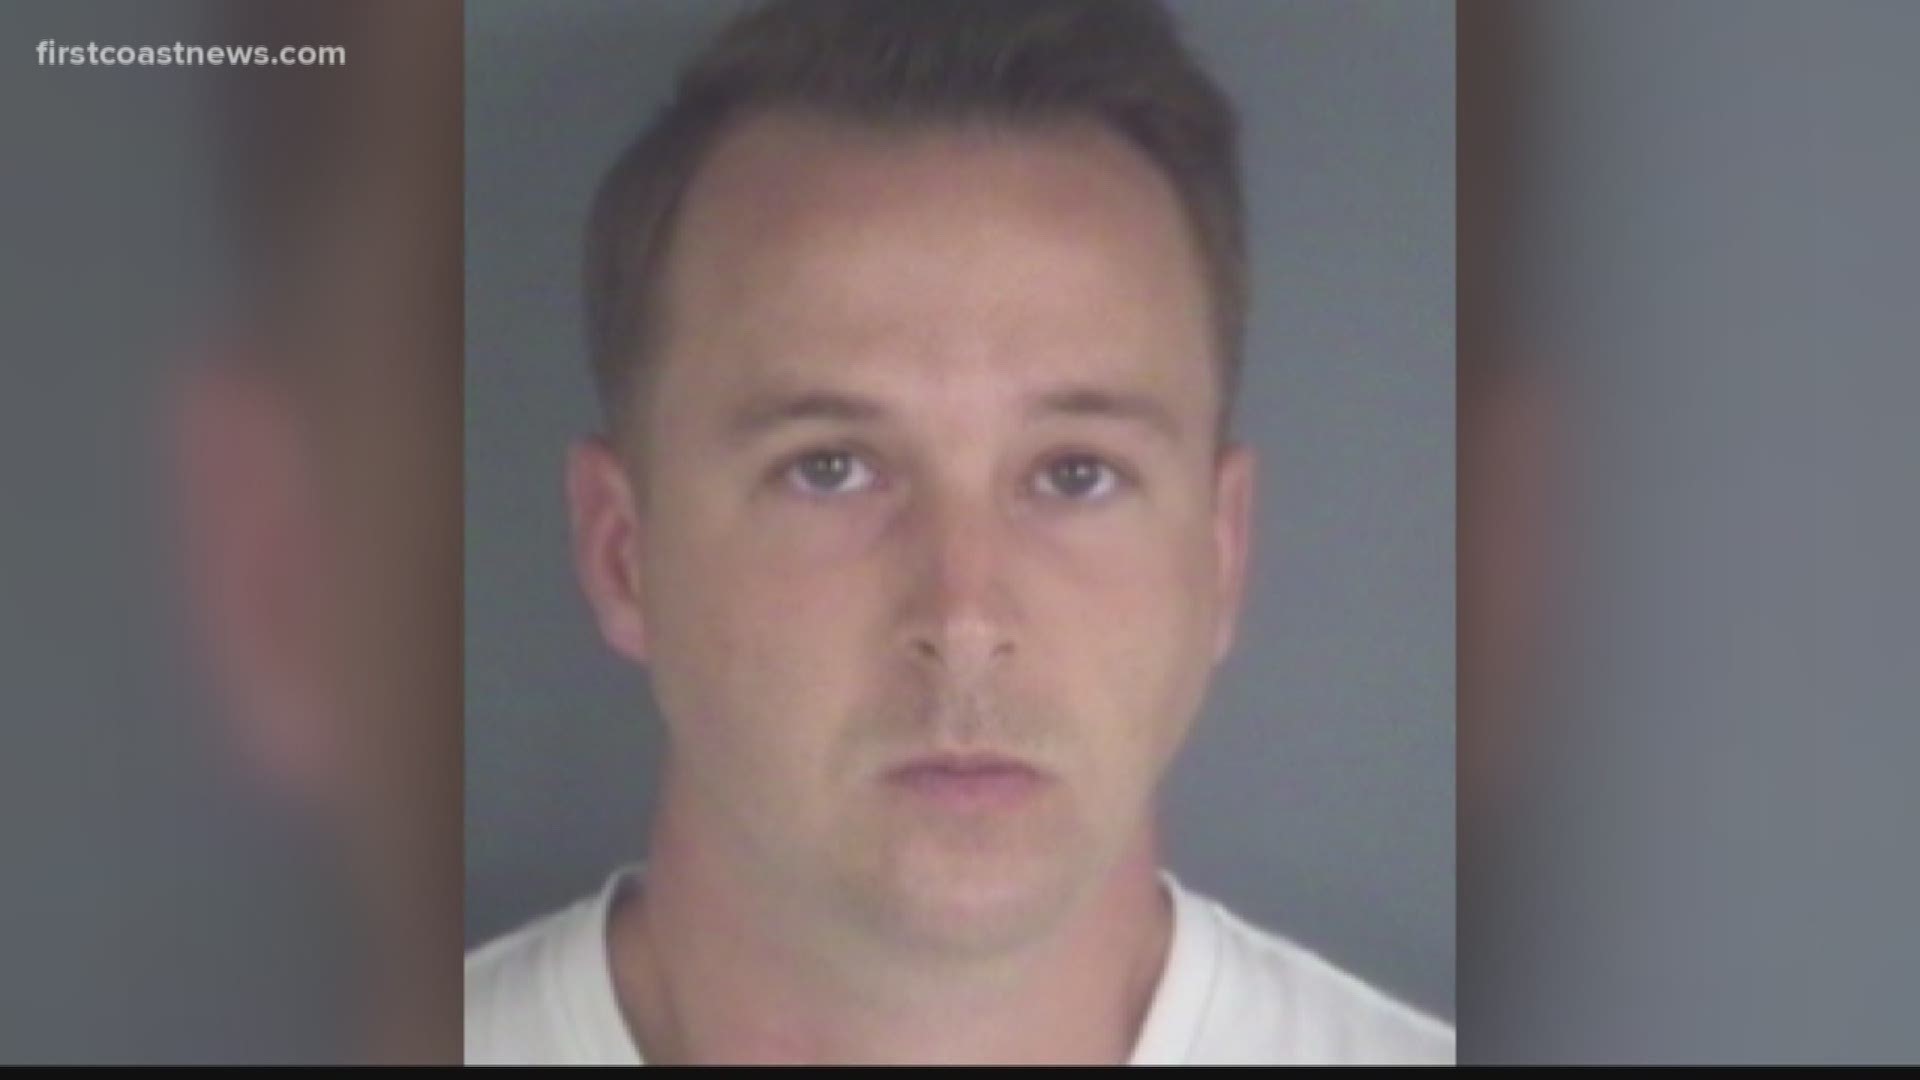 Naval Station Mayport sailor arrested for allegedly attempting to meet 12-year-old girl for sex firstcoastnews